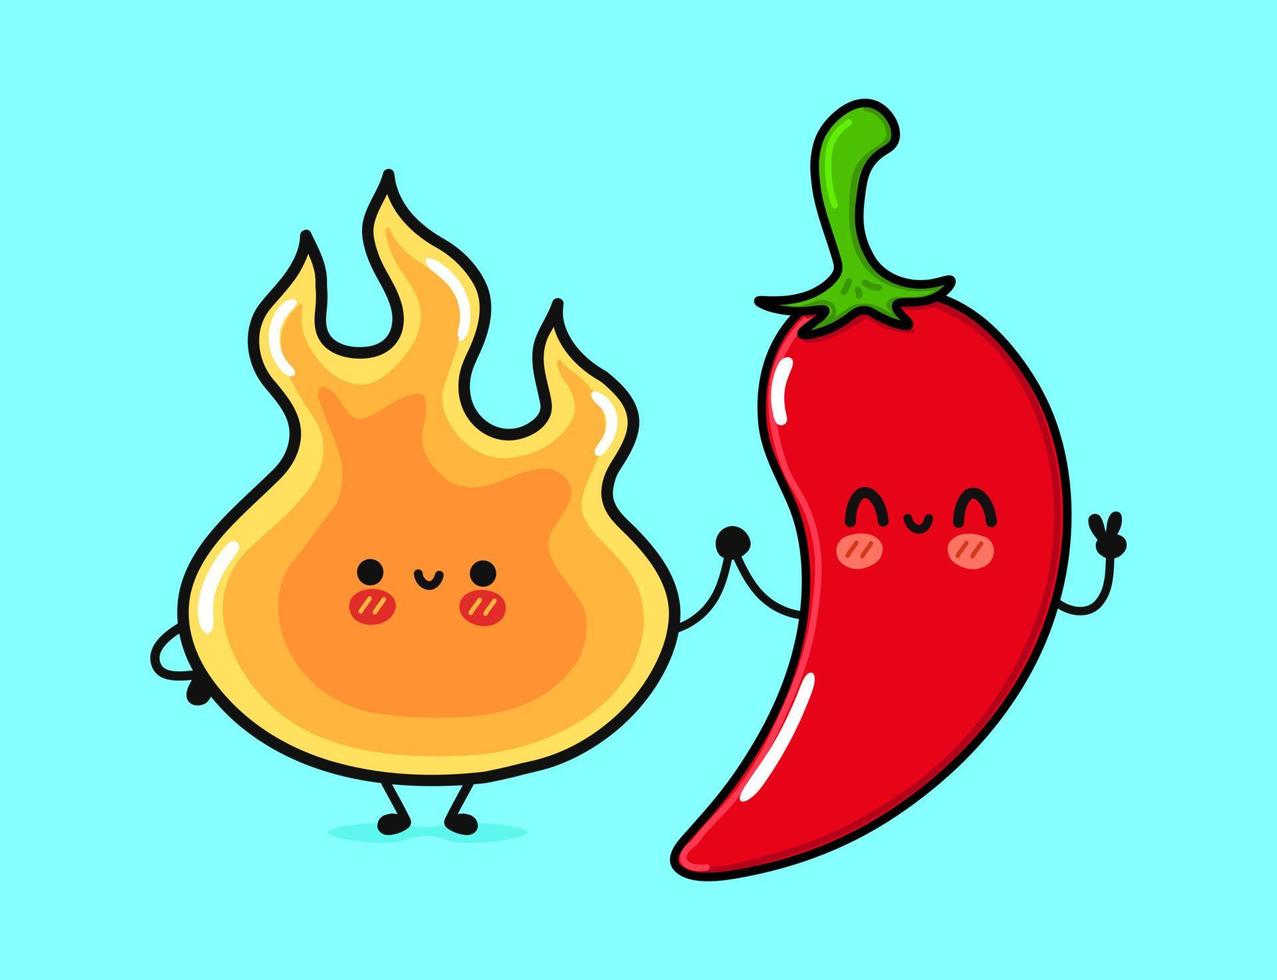 Cute, funny happy fire and chili pepper. Vector hand drawn cartoon kawaii characters, illustration icon. Funny cartoon fire and chili pepper mascot character concept